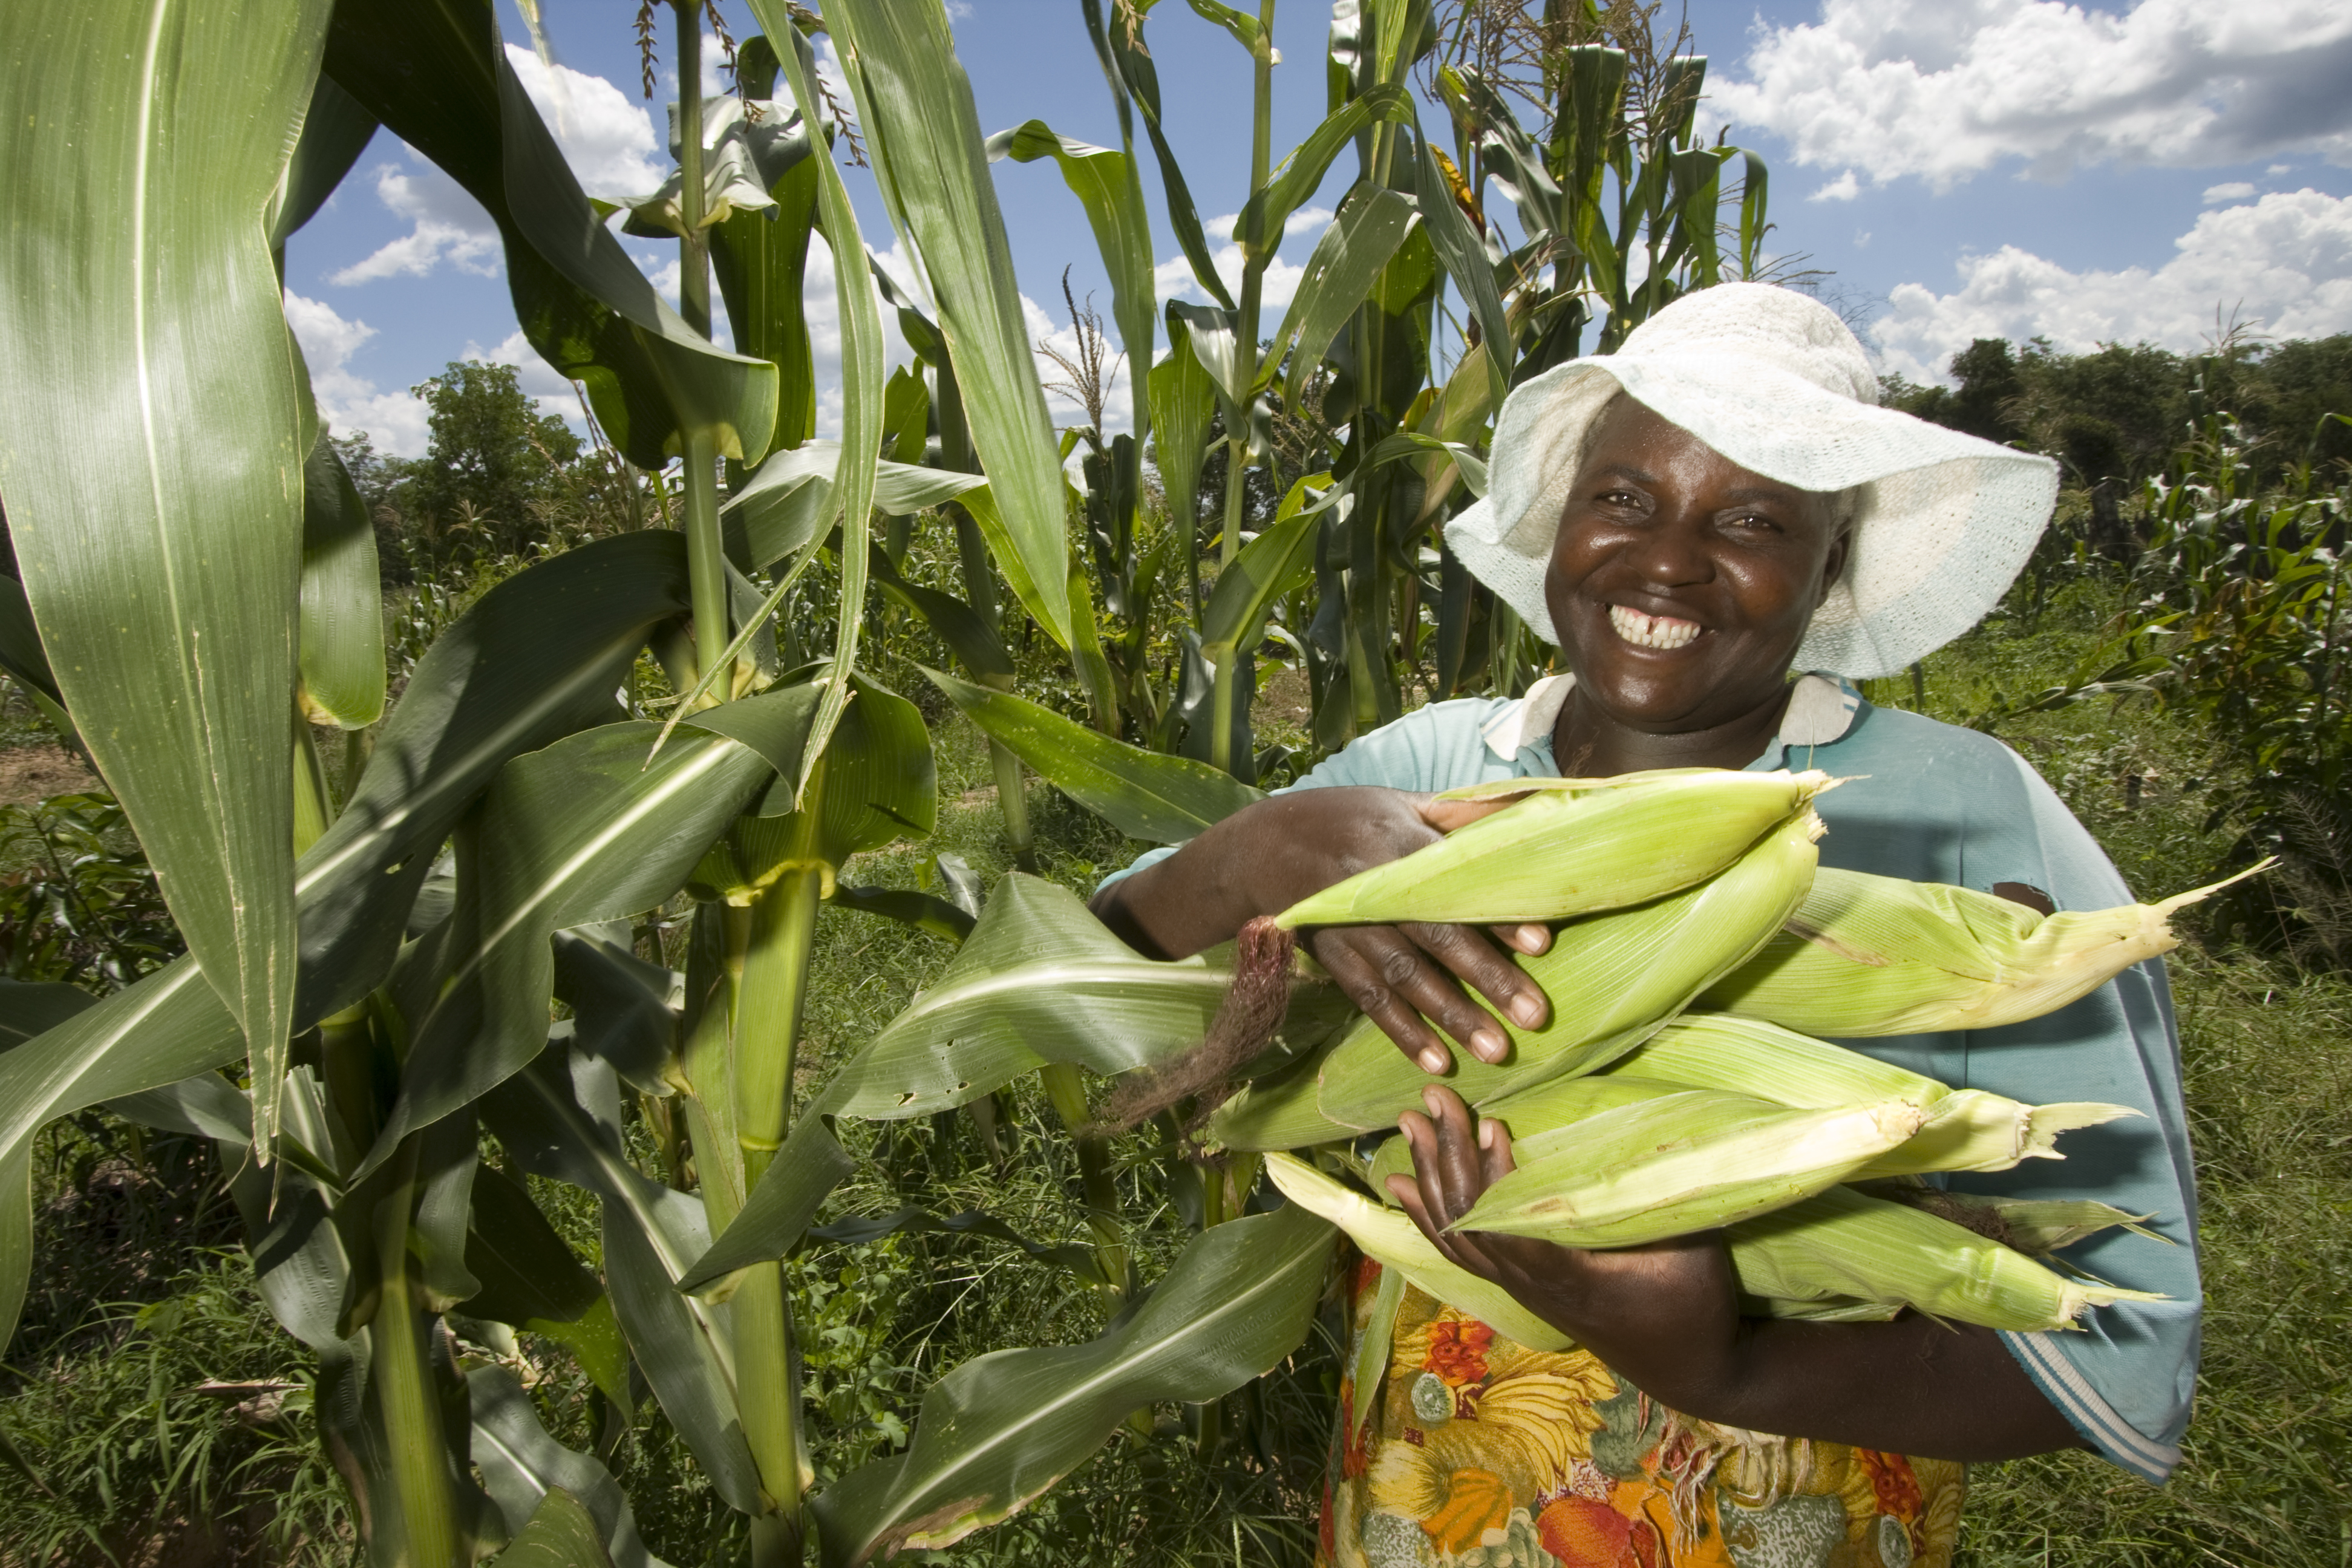 Maize is the staple grain in Malawi, without crops families are cut from their main nutritional source.